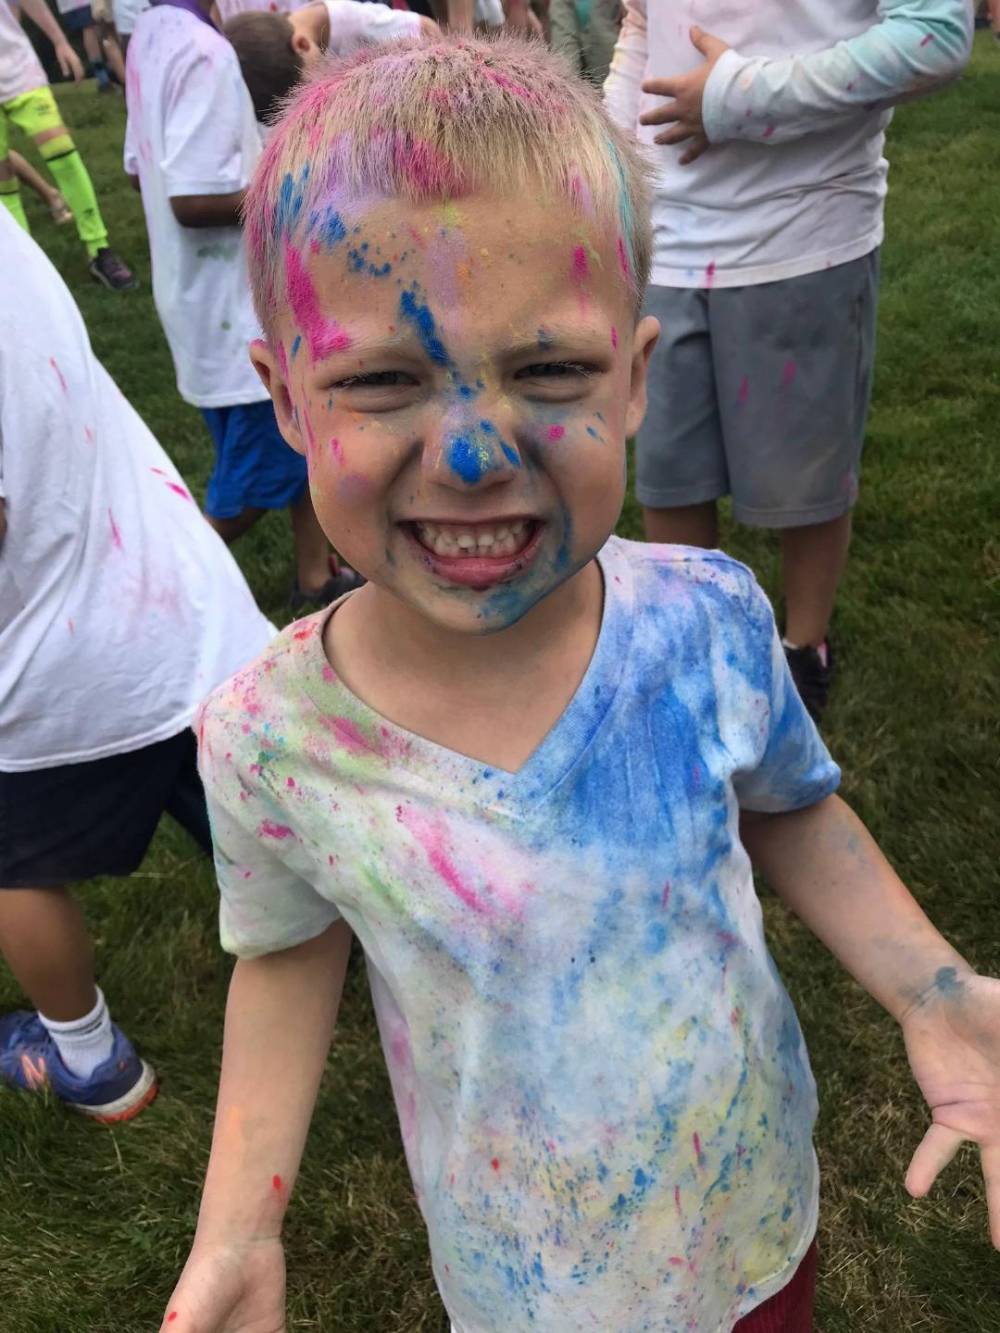 TOP ILLINOIS SUMMER CAMP: Good Times Day Camp Libertyville is a Top Summer Camp located in Libertyville Illinois offering many fun and enriching camp programs. Good Times Day Camp Libertyville also offers CIT/LIT and/or Teen Leadership Opportunities, too.